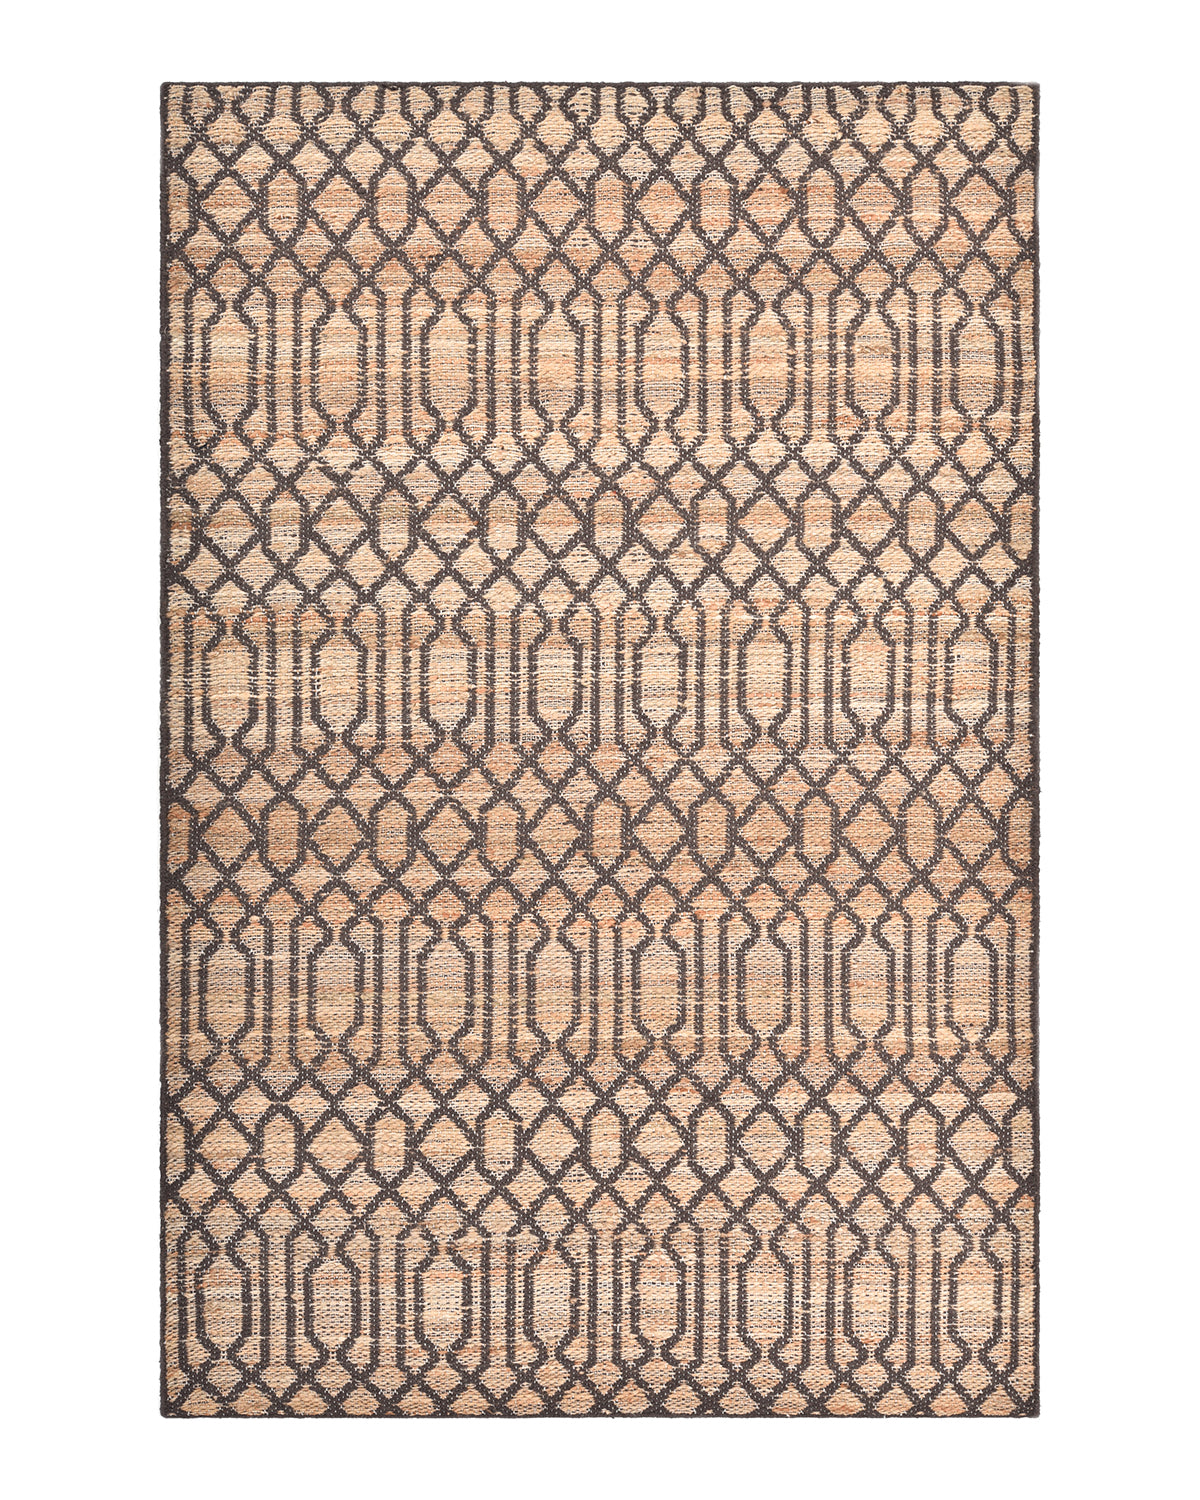 Sophie Hand Woven Contemporary Transitional Jute Area Rug